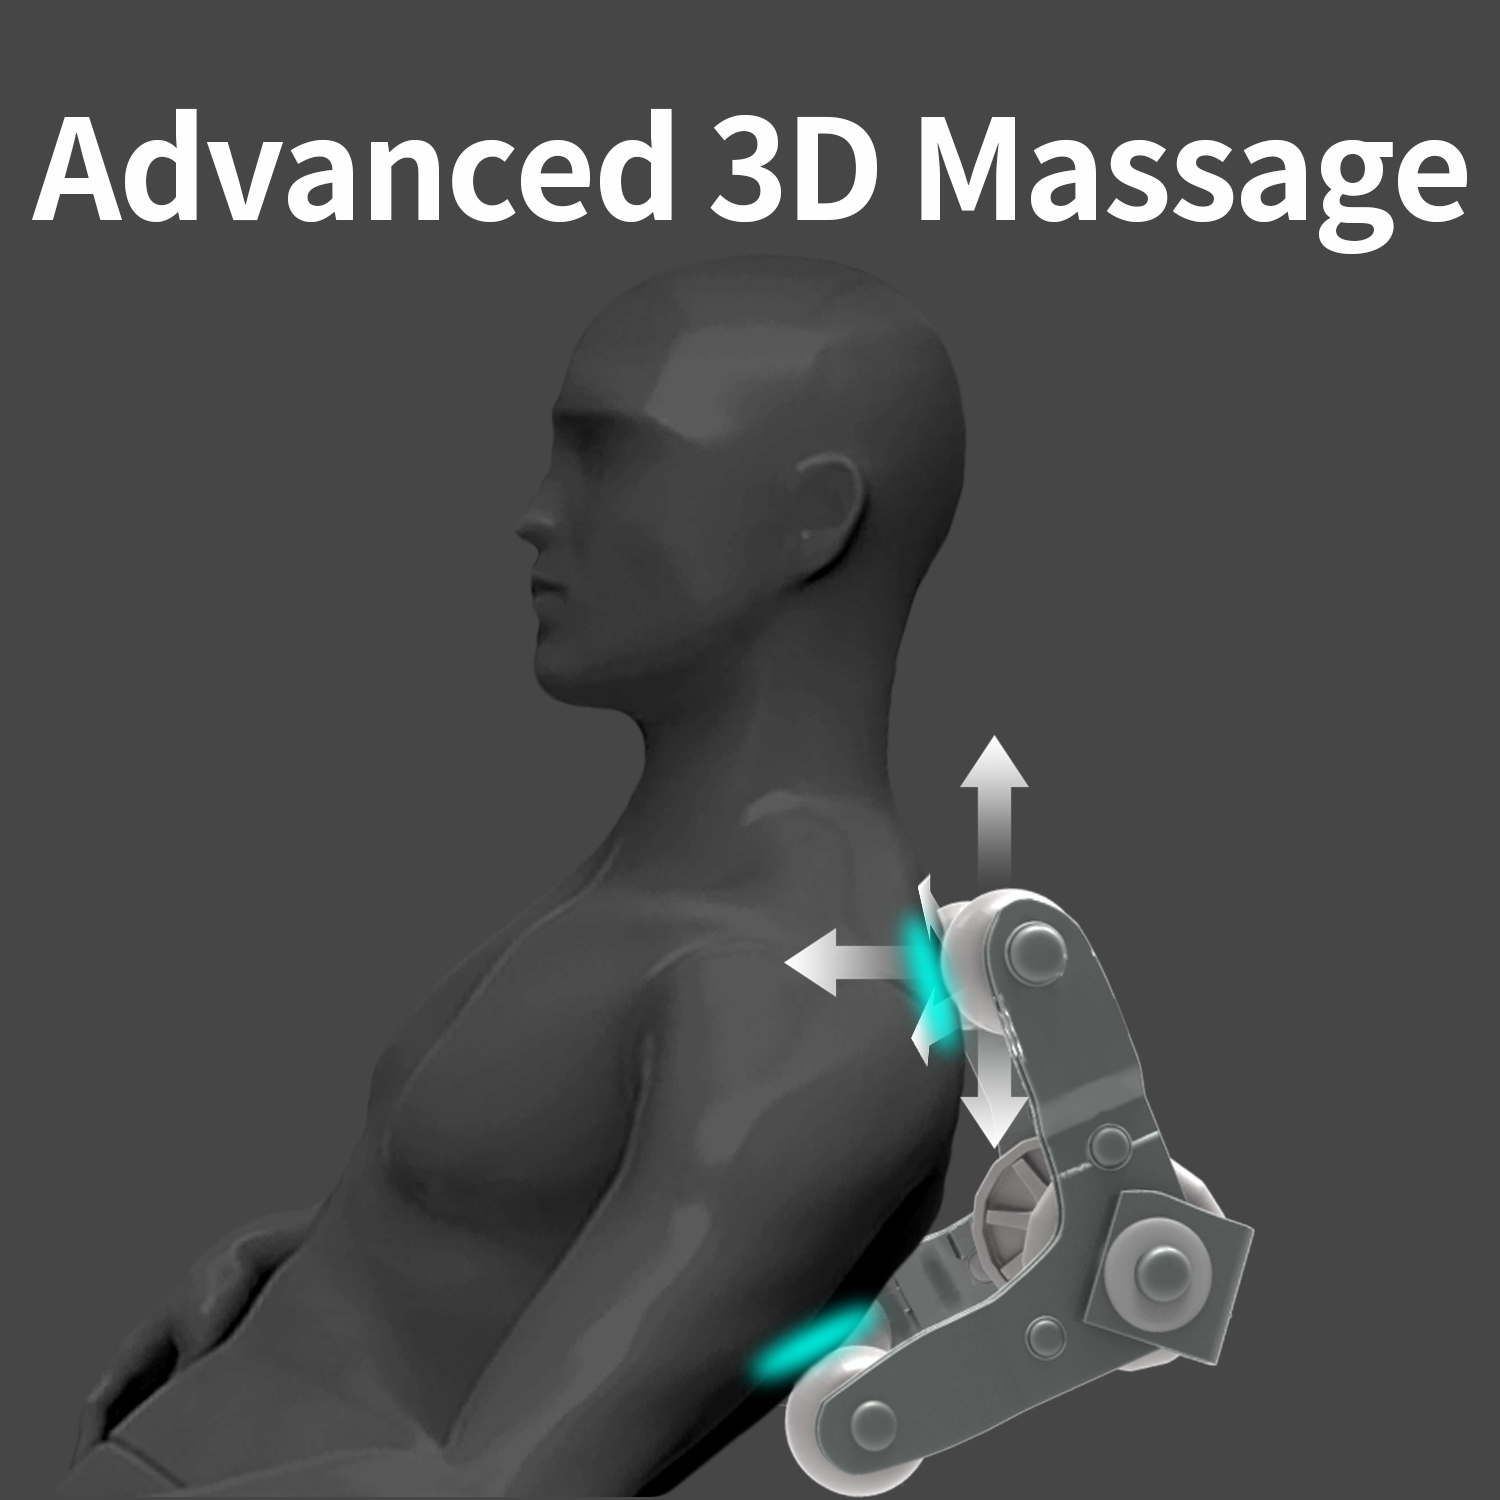 The difference between 2D massage and 3D massage